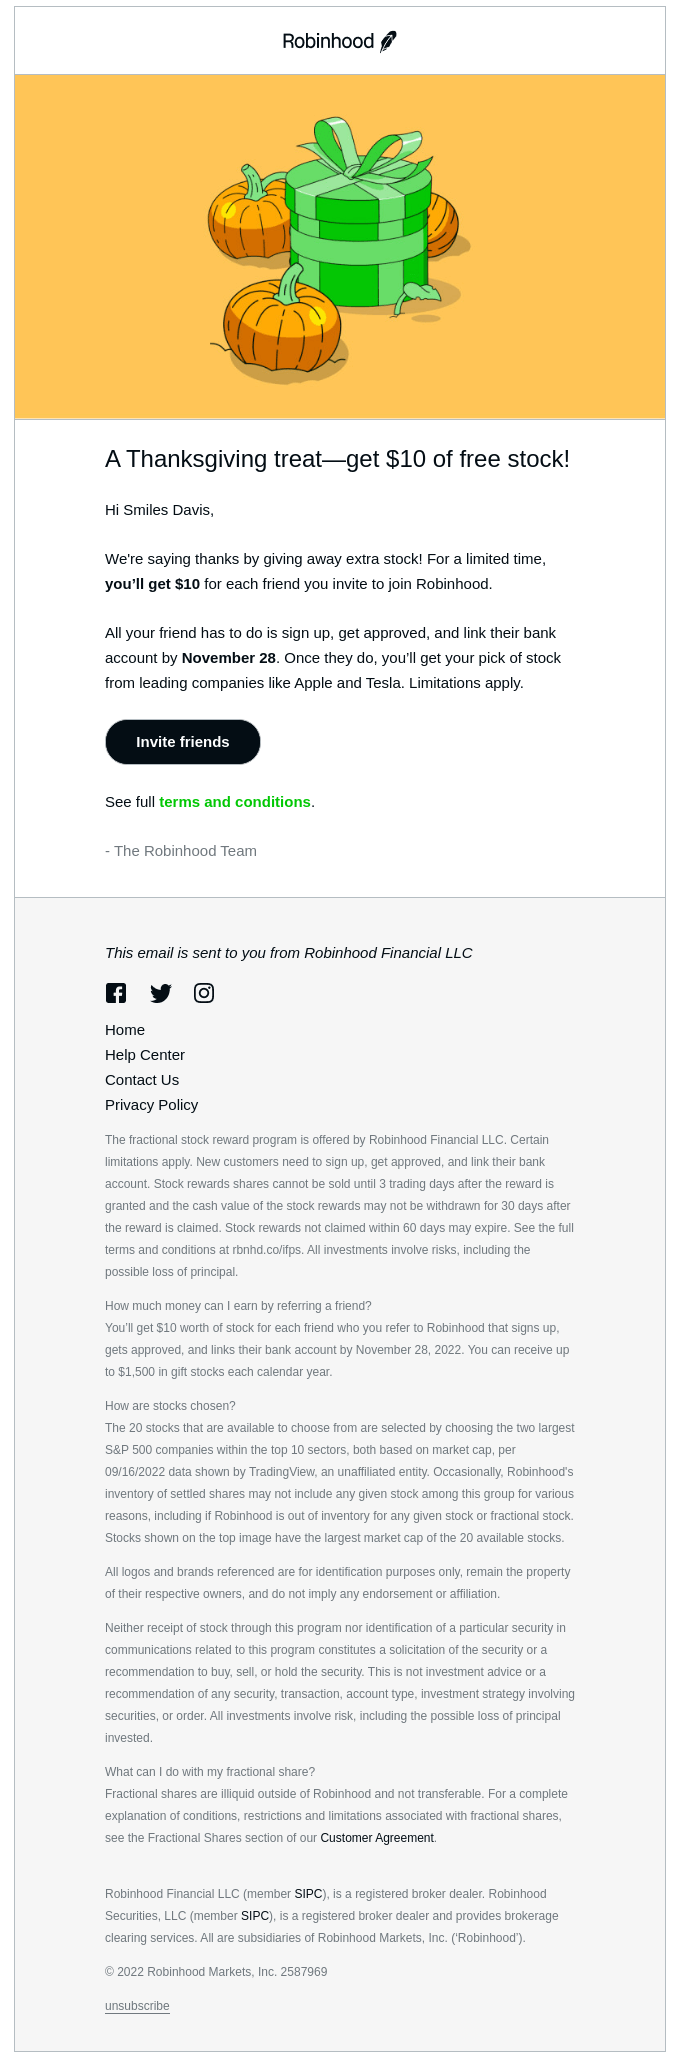 Thanksgiving email from Robinhood Financia